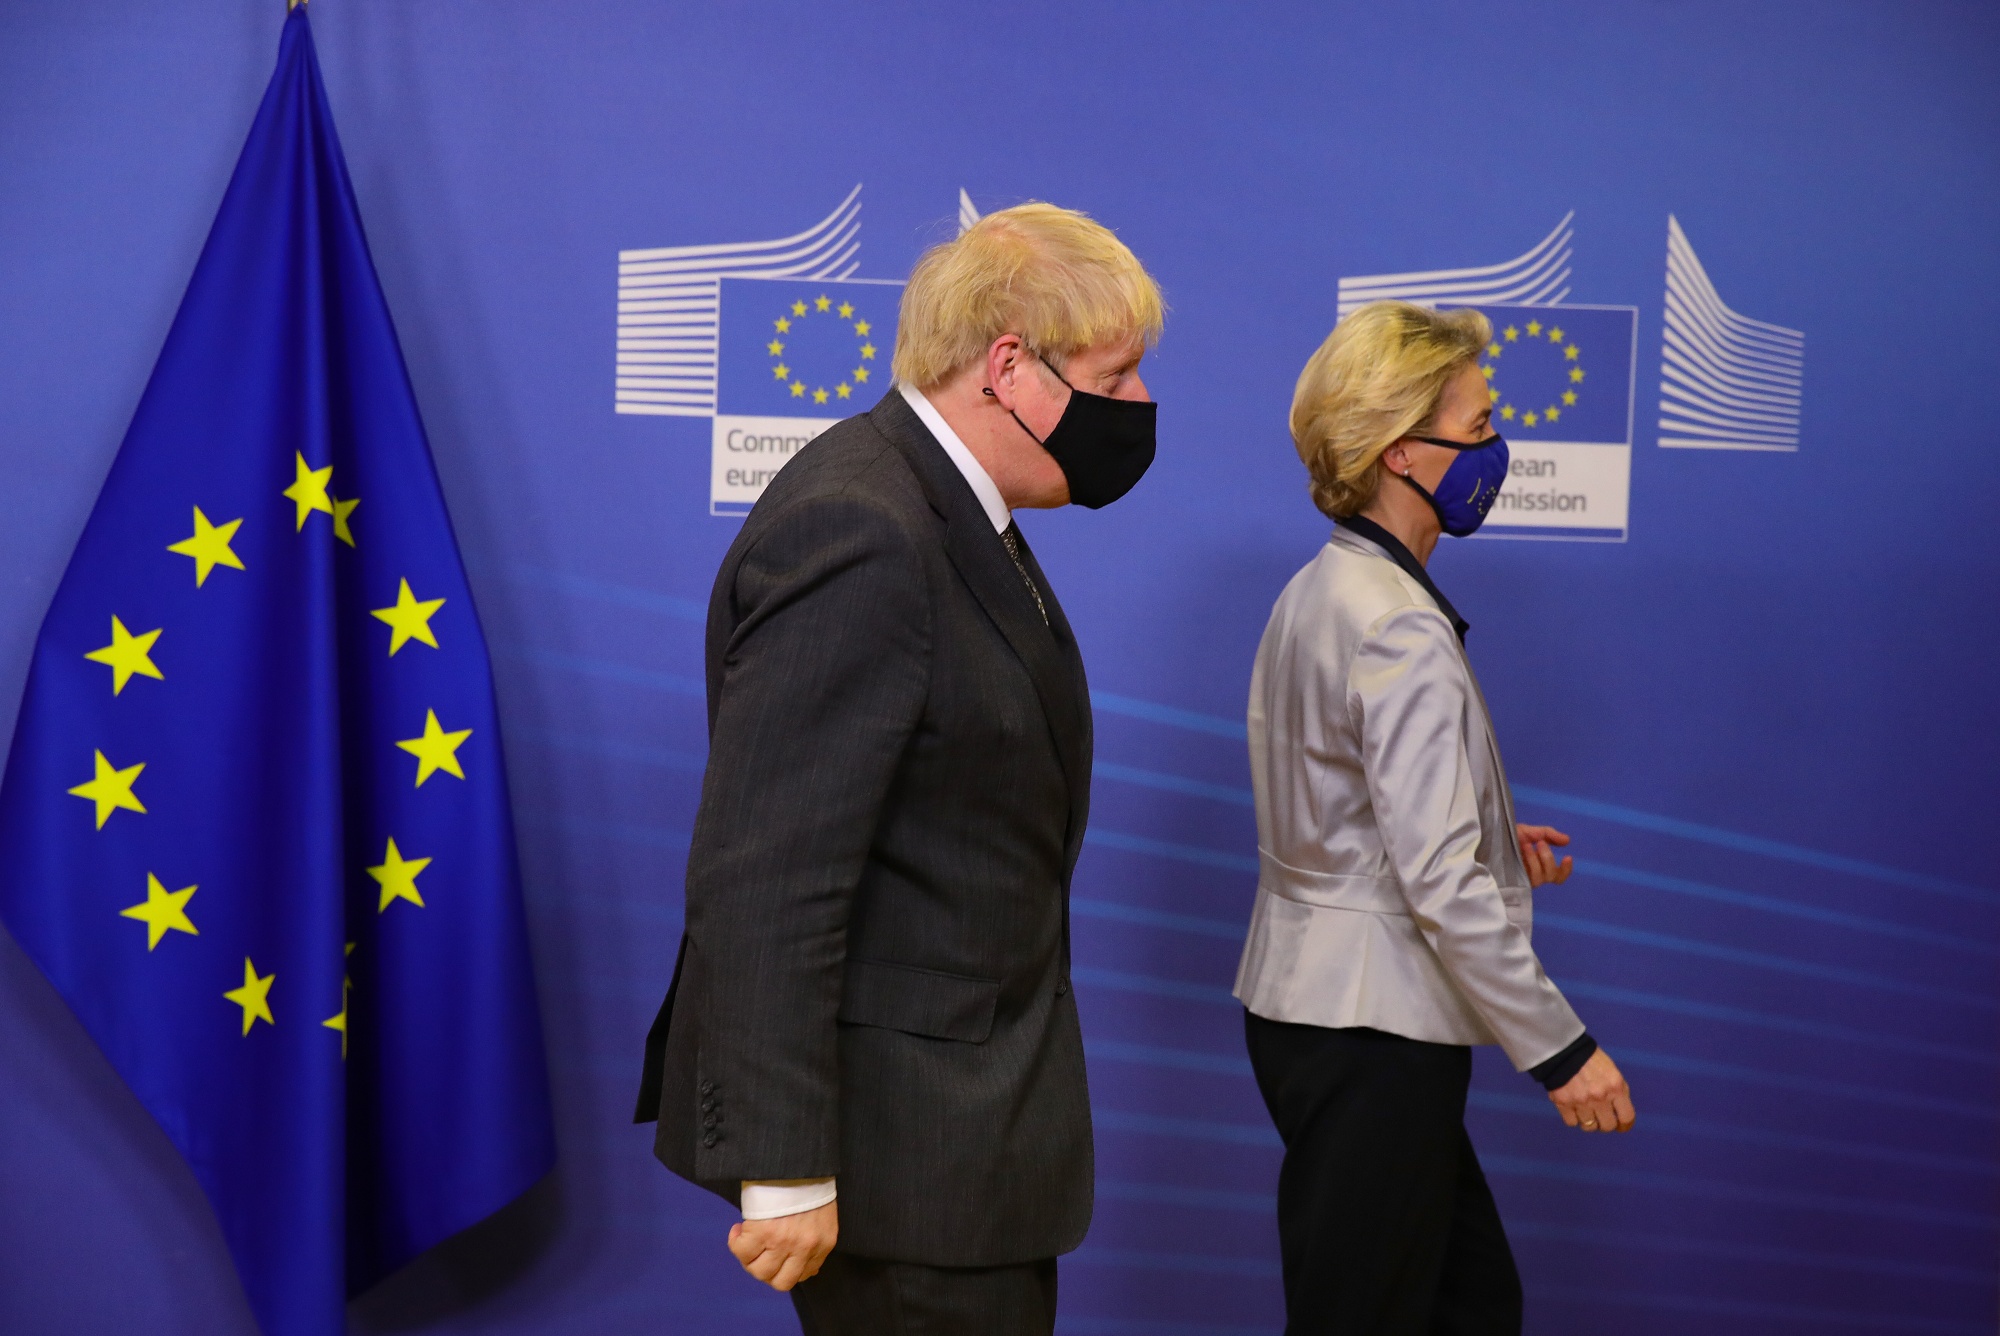 Boris Johnson, U.K. prime minister, left, and Ursula von der Leyen, president of the European Commission, ahead of a dinner meeting at the Berlaymont building in Brussels, Belgium, on Wednesday, Dec. 9, 2020. Johnson is heading into what may be the most important meal of his life: a dinner with the head of the European Commission in Brussels that could make or break a post-Brexit trade deal.